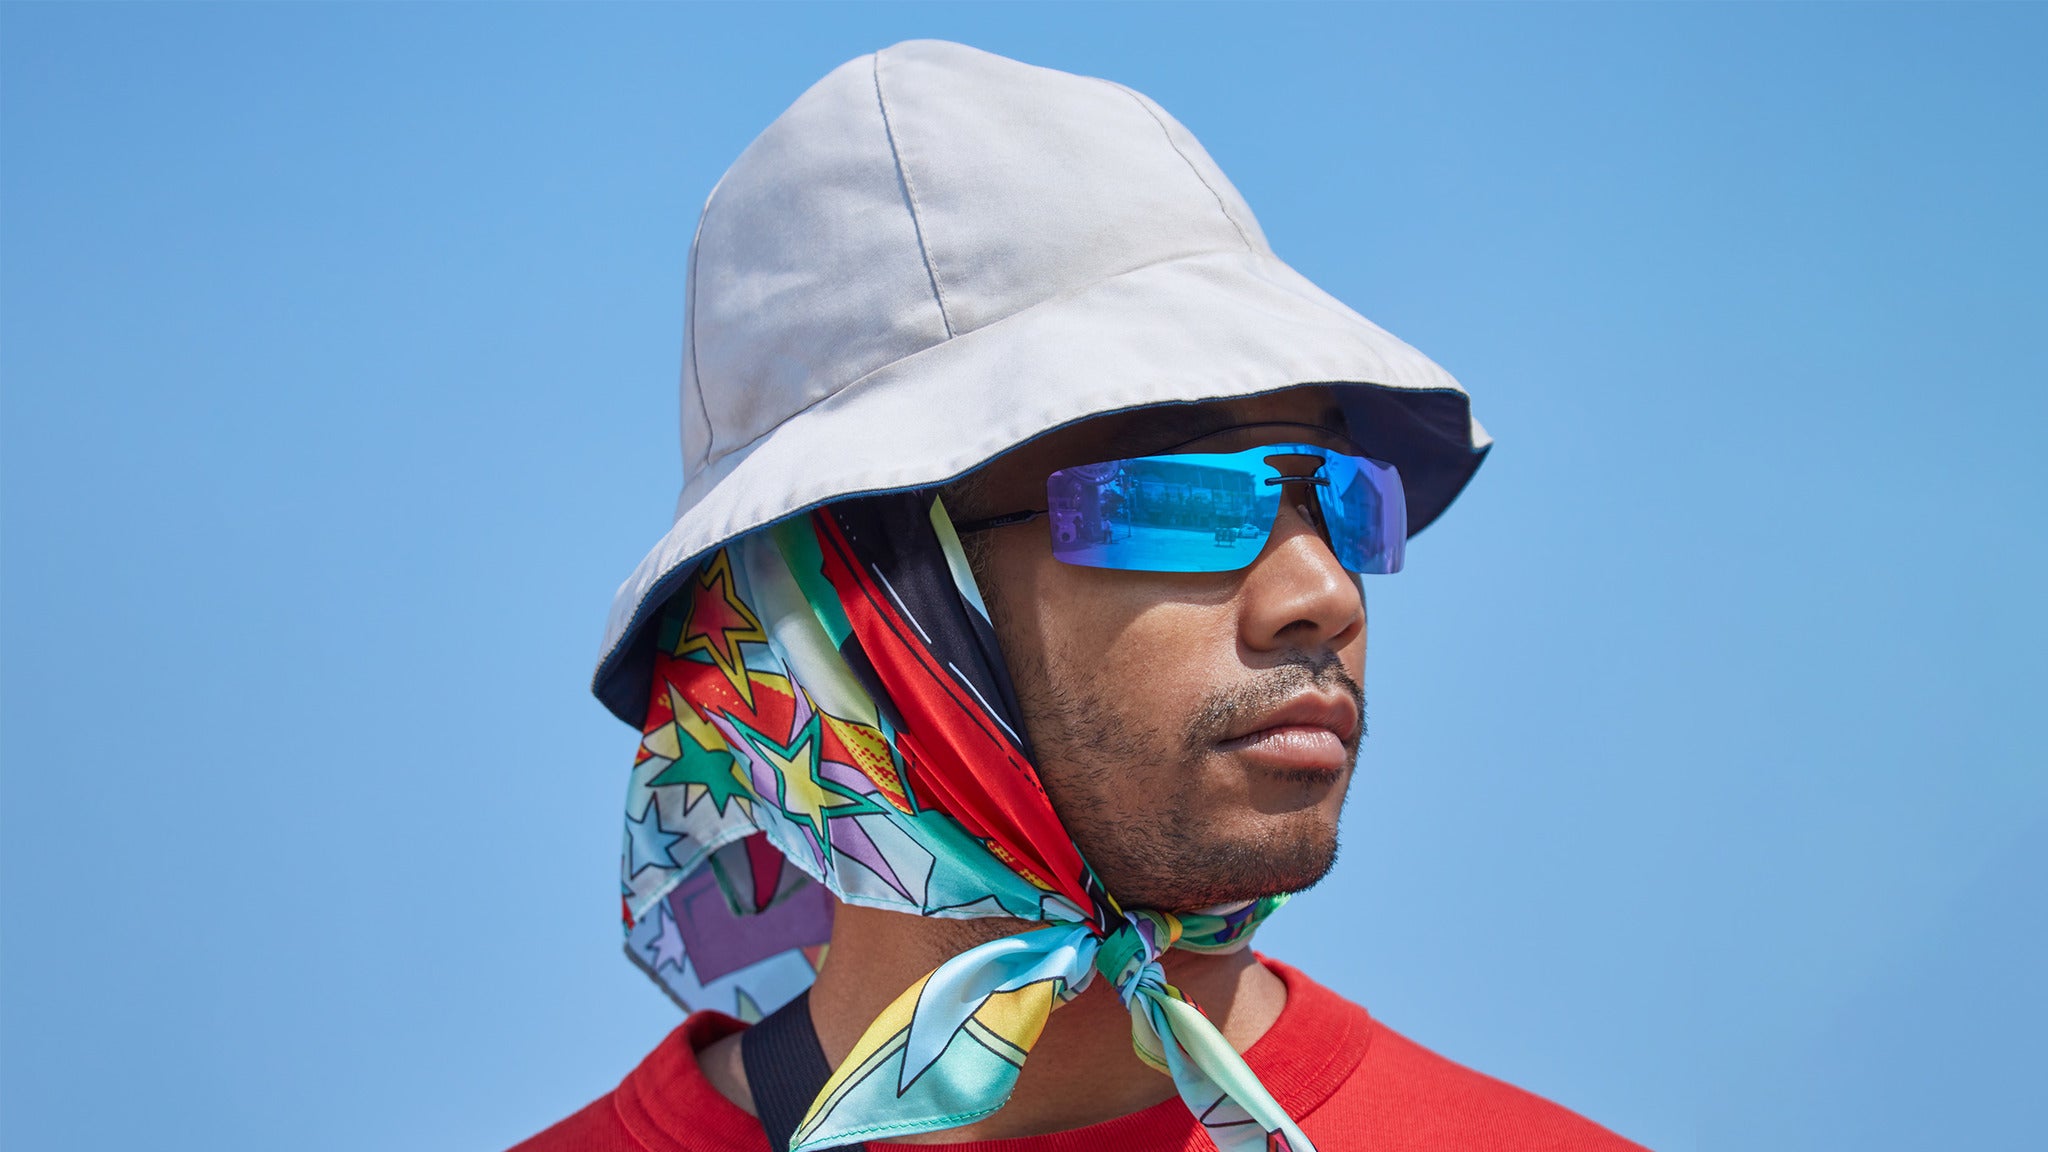 Toro y Moi in Hollywood promo photo for Artist presale offer code